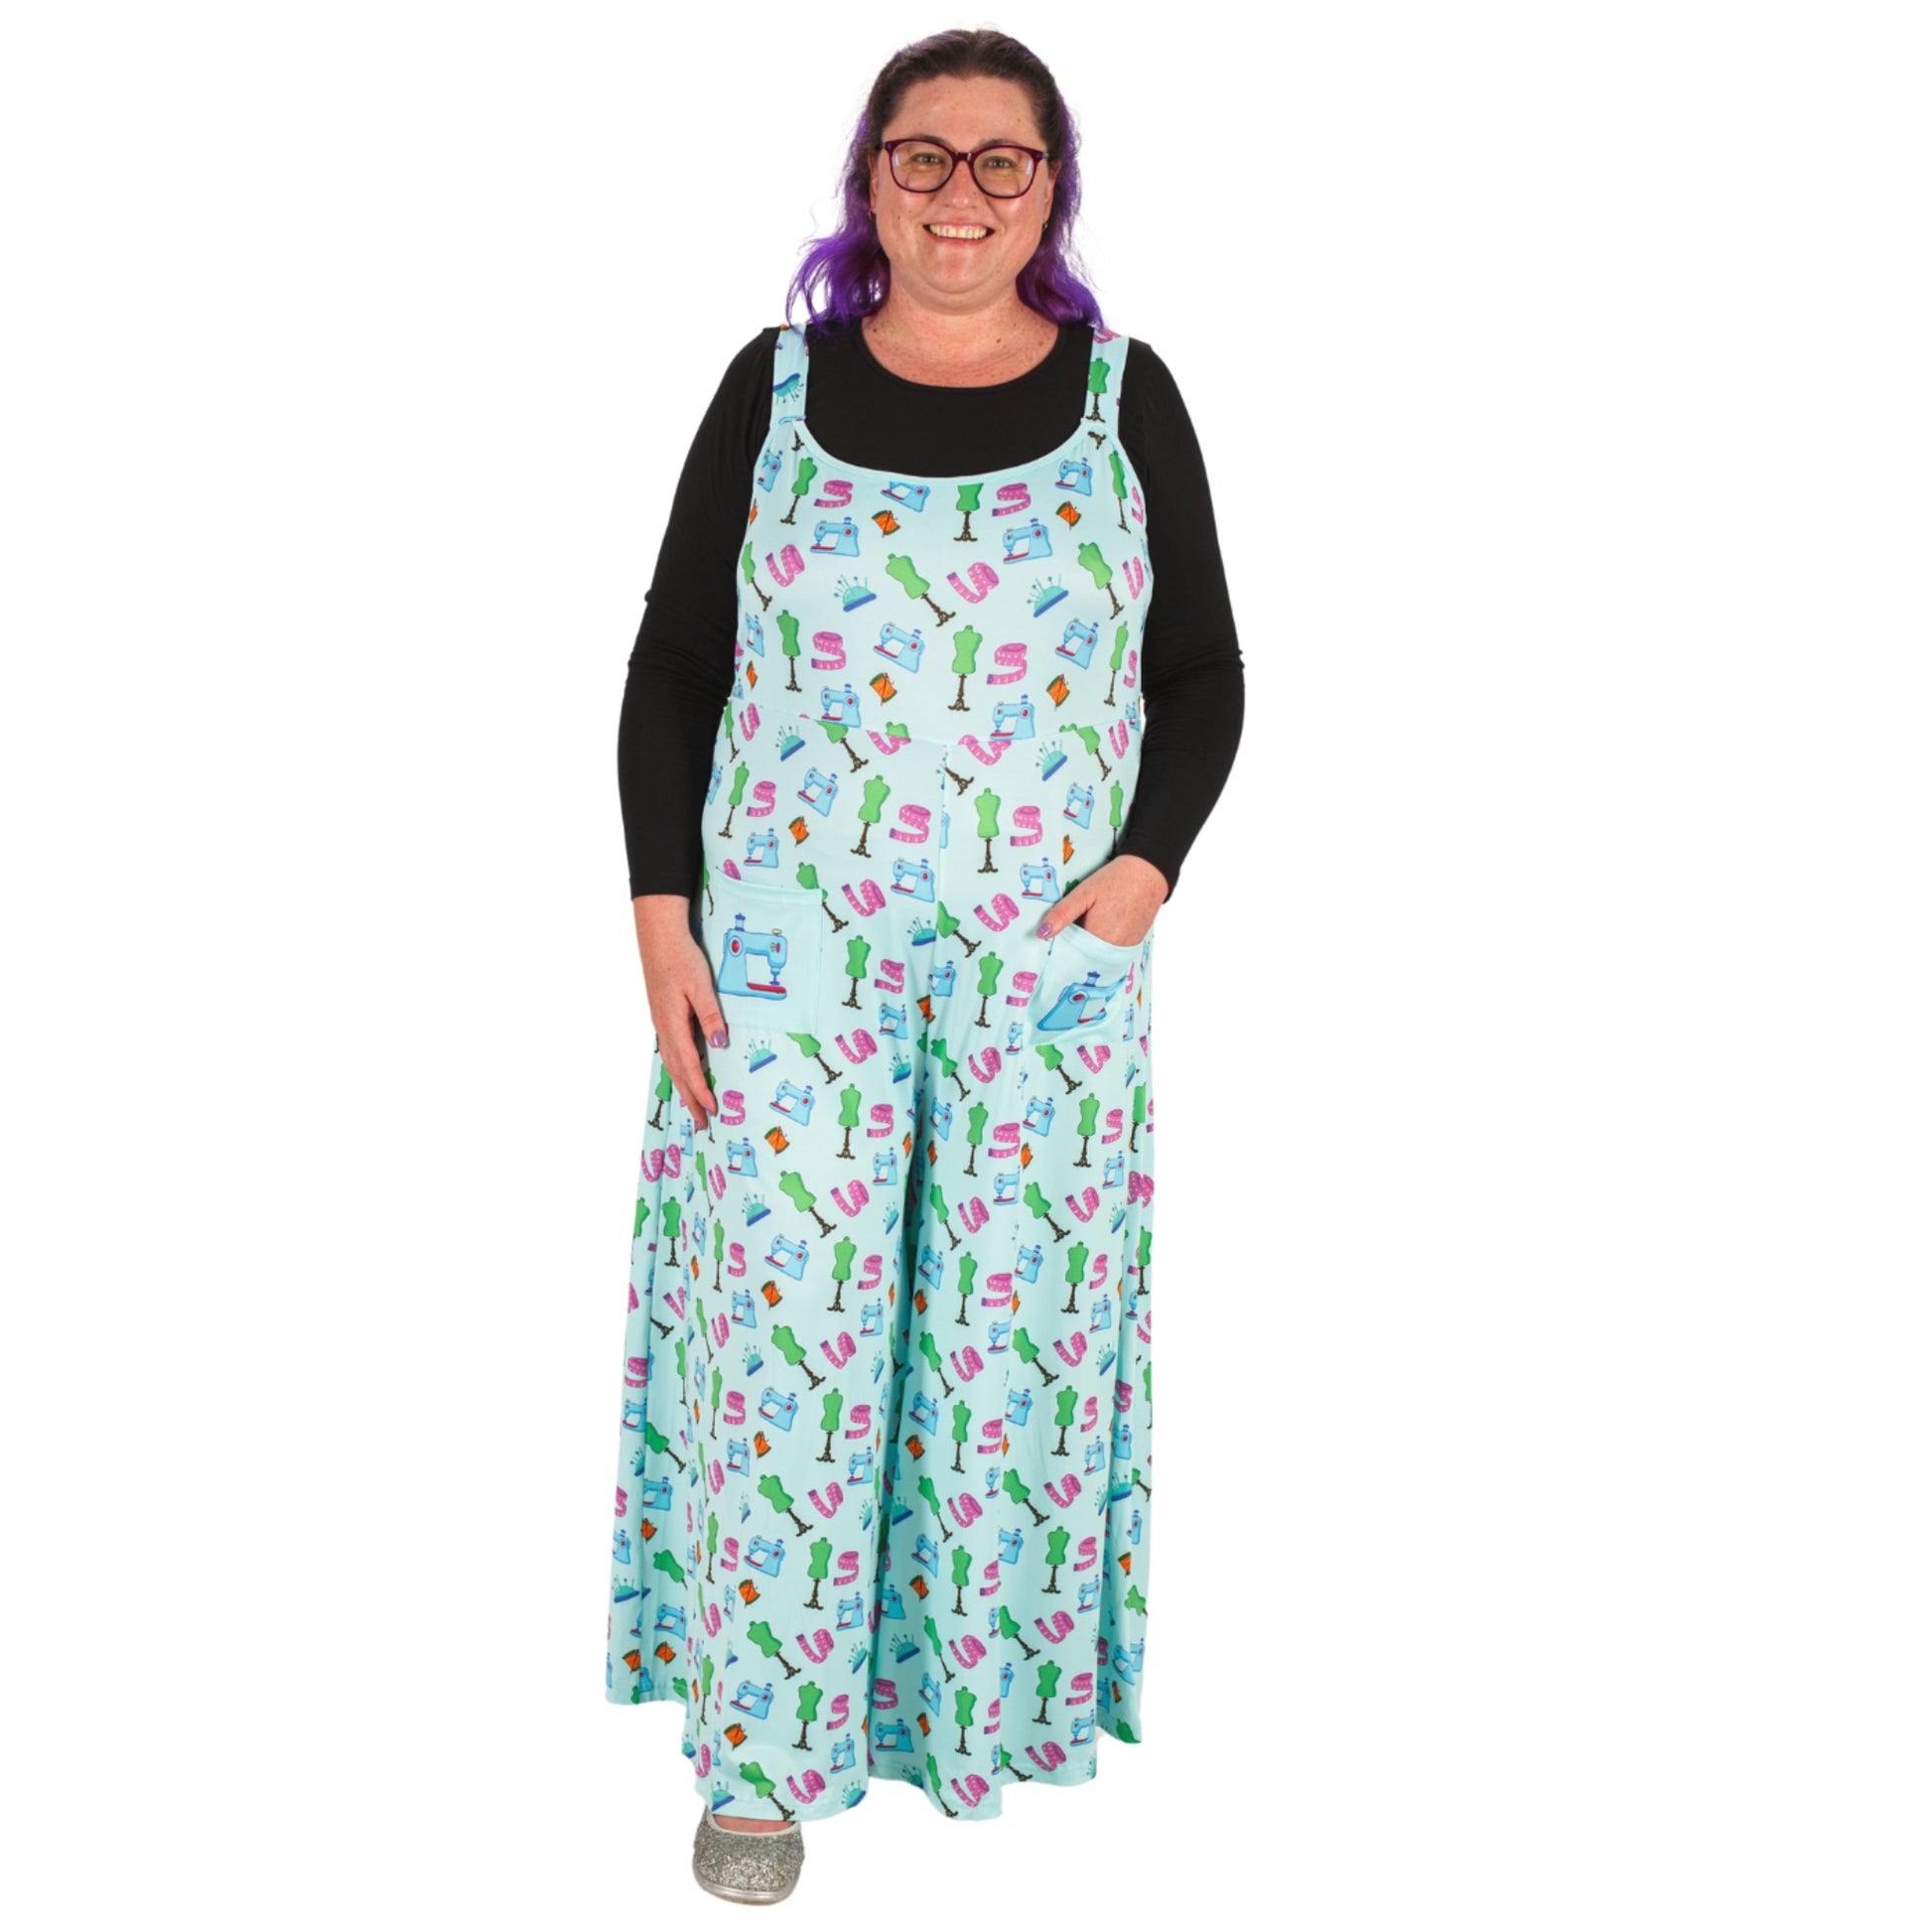 Haberdashery Jumpsuit by RainbowsAndFairies.com.au (Sewing - Dressmaking - Overalls - Wide Leg Pants - Kitsch - Rockabilly) - SKU: CL_JUMPS_HABER_ORG - Pic-04